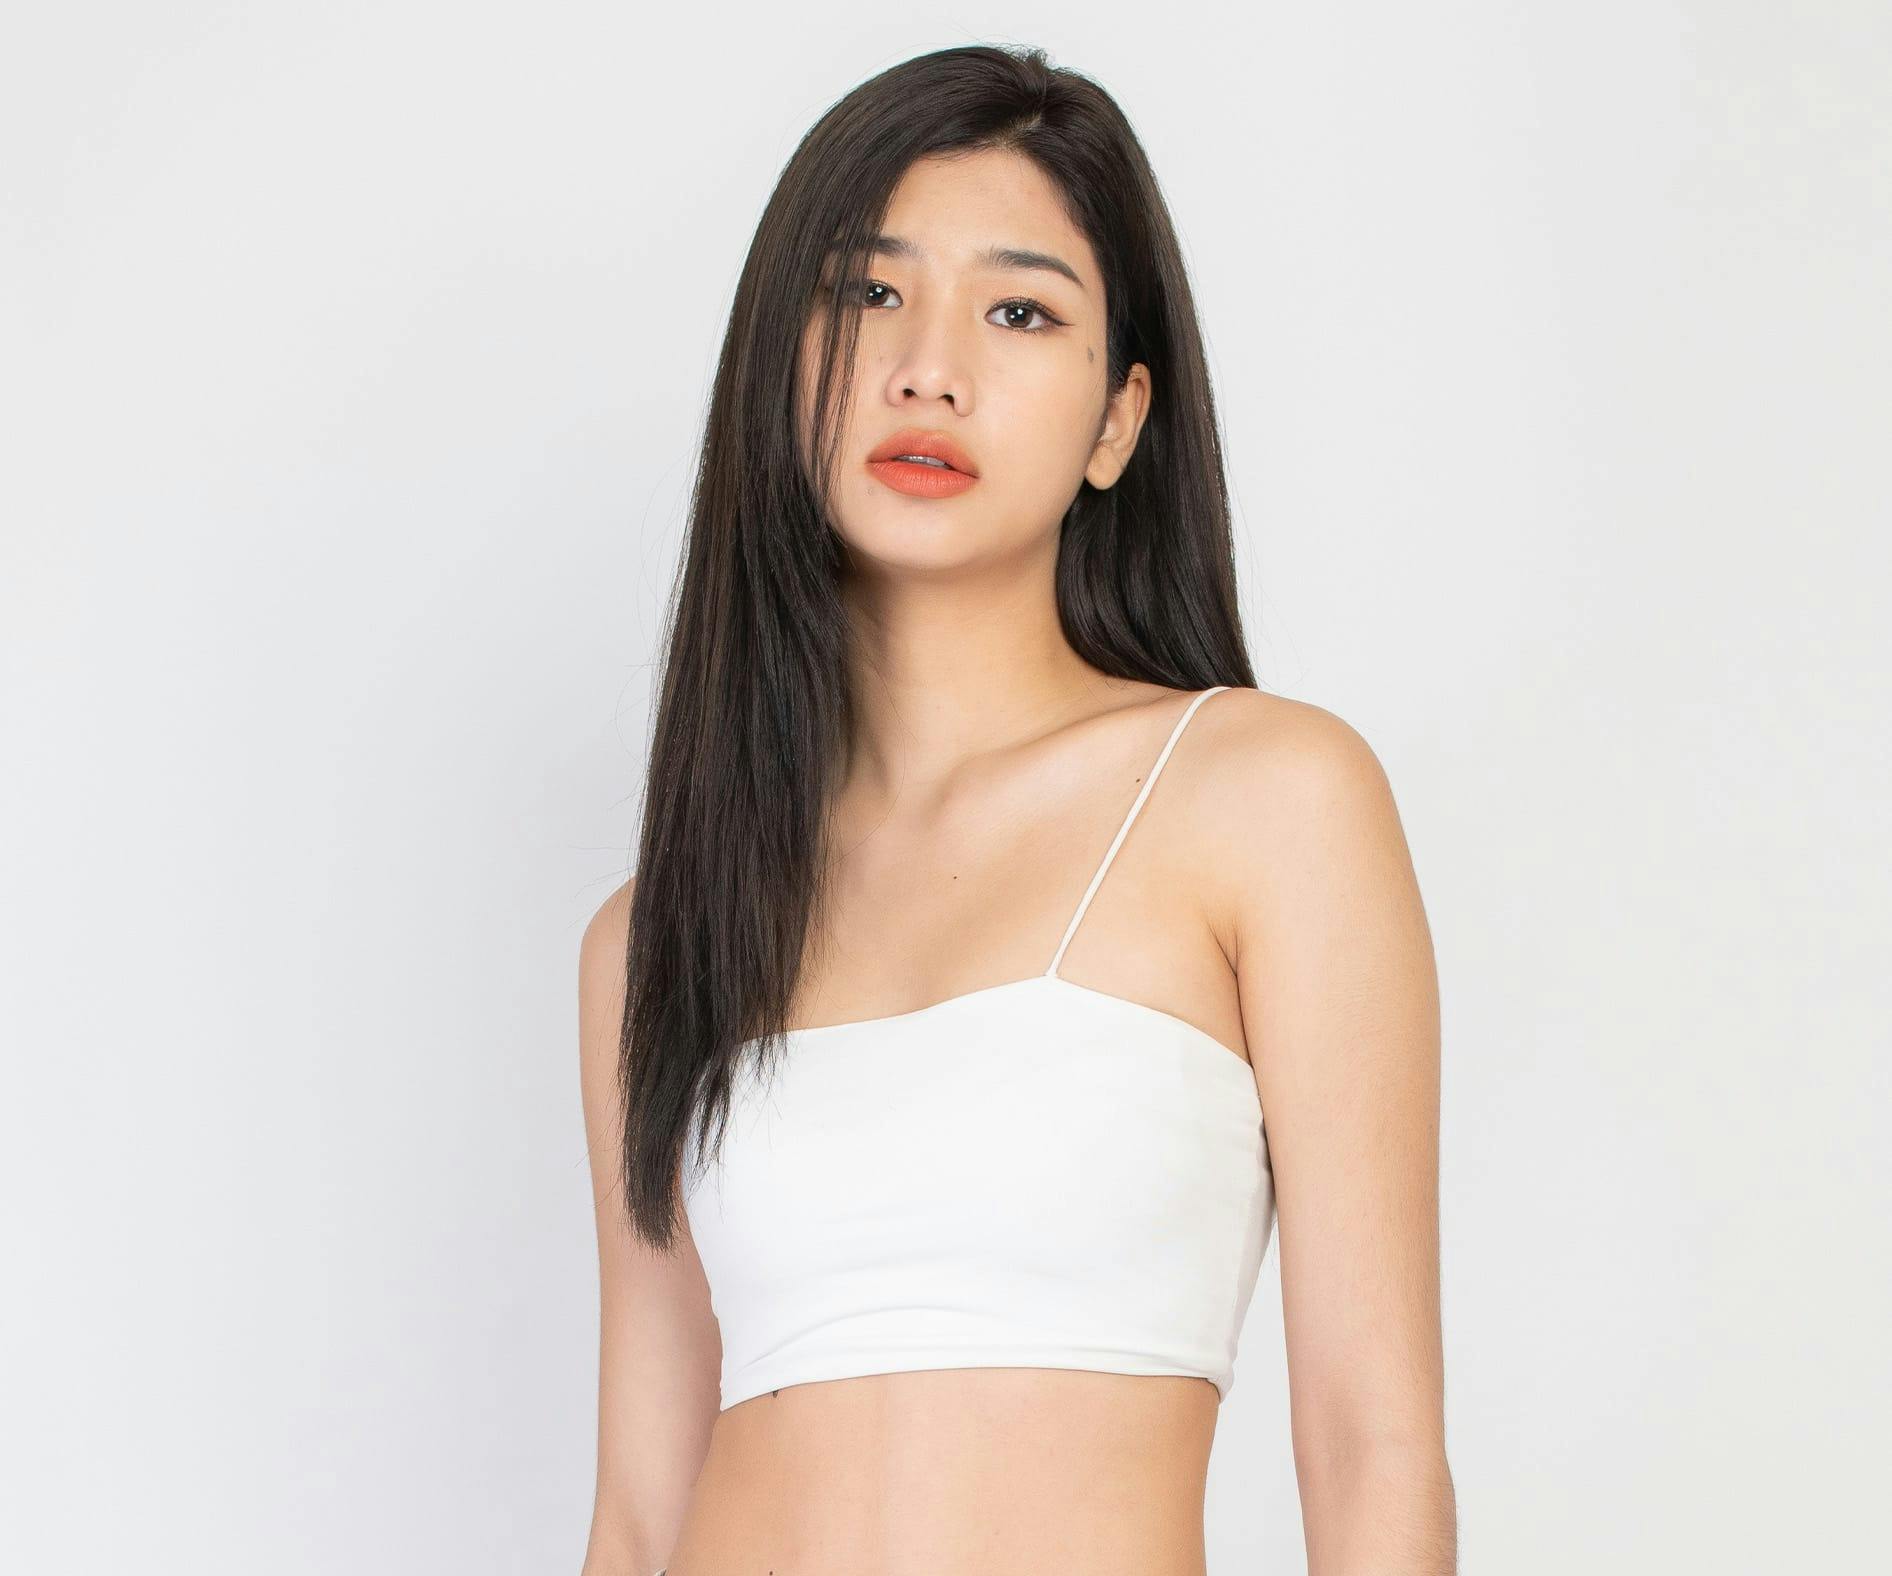 Woman with long black hair in white top